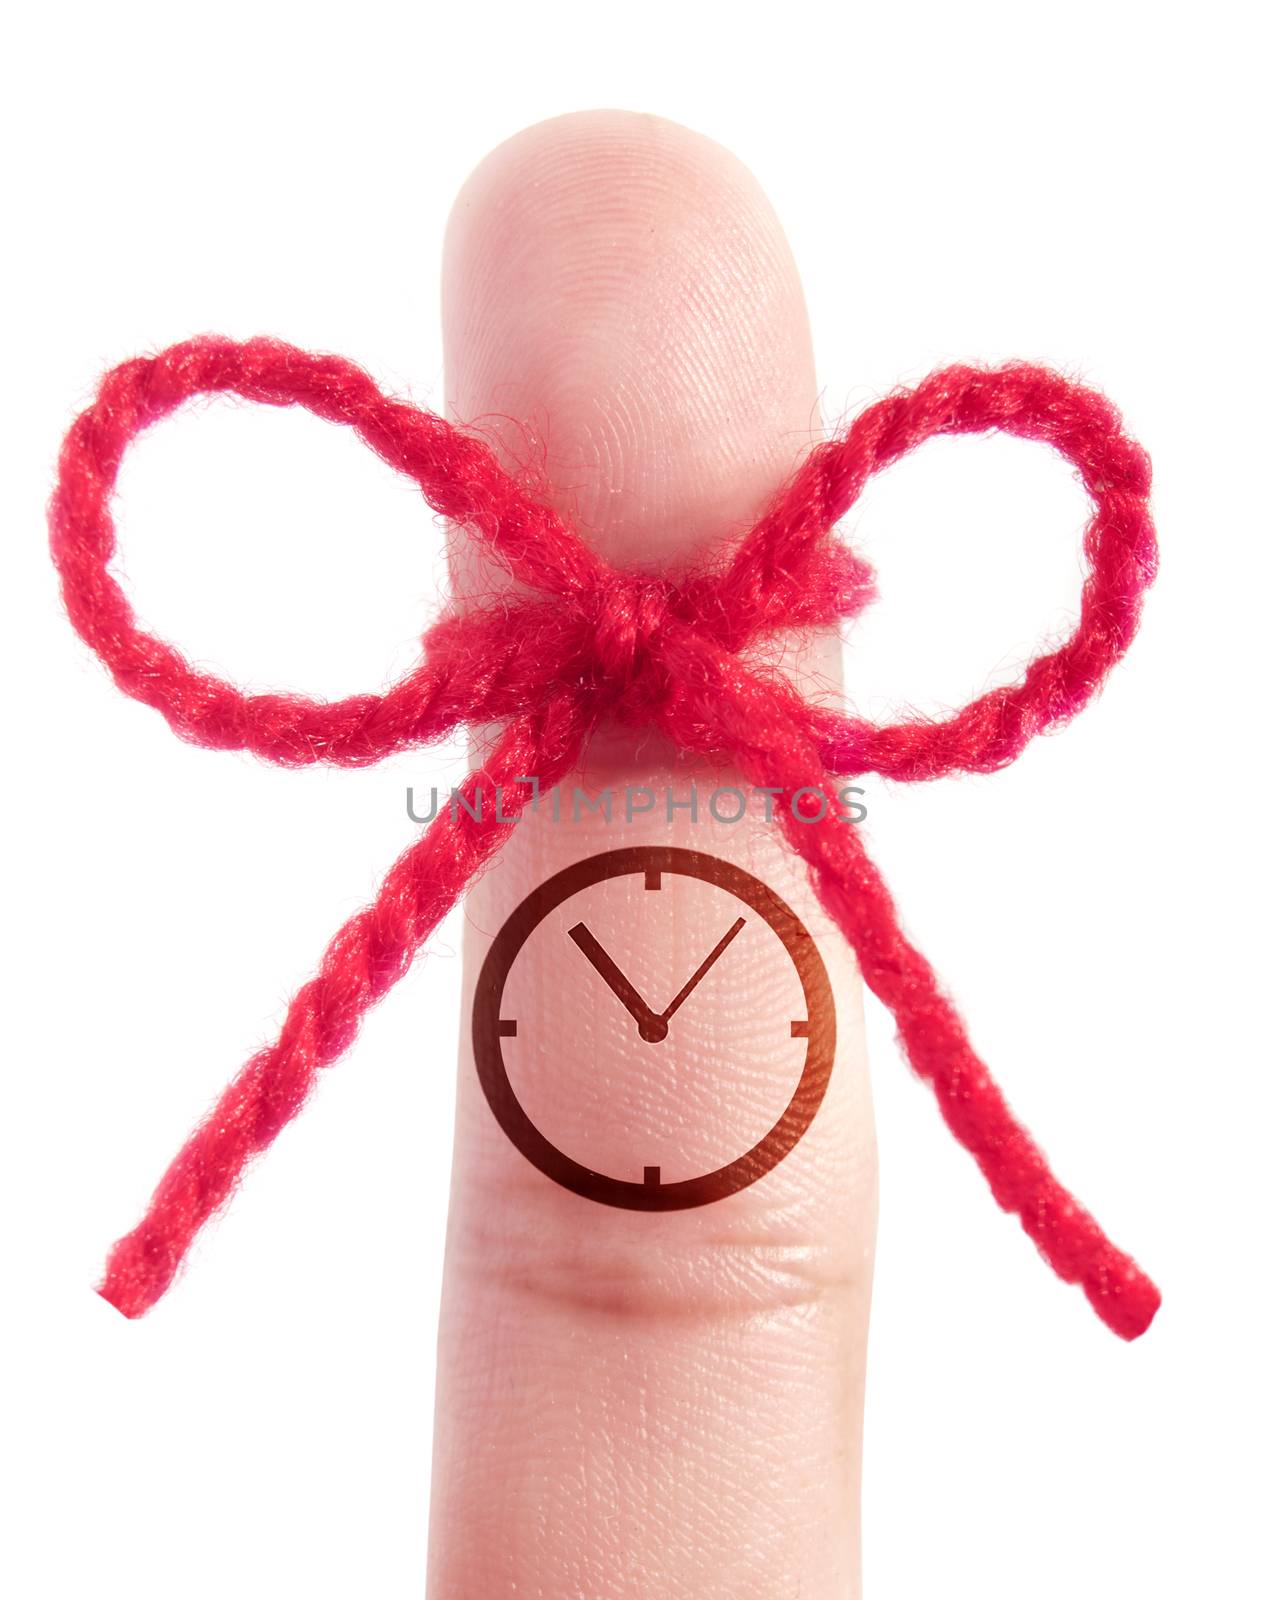 Clock icon printed on a finger tied with red bow